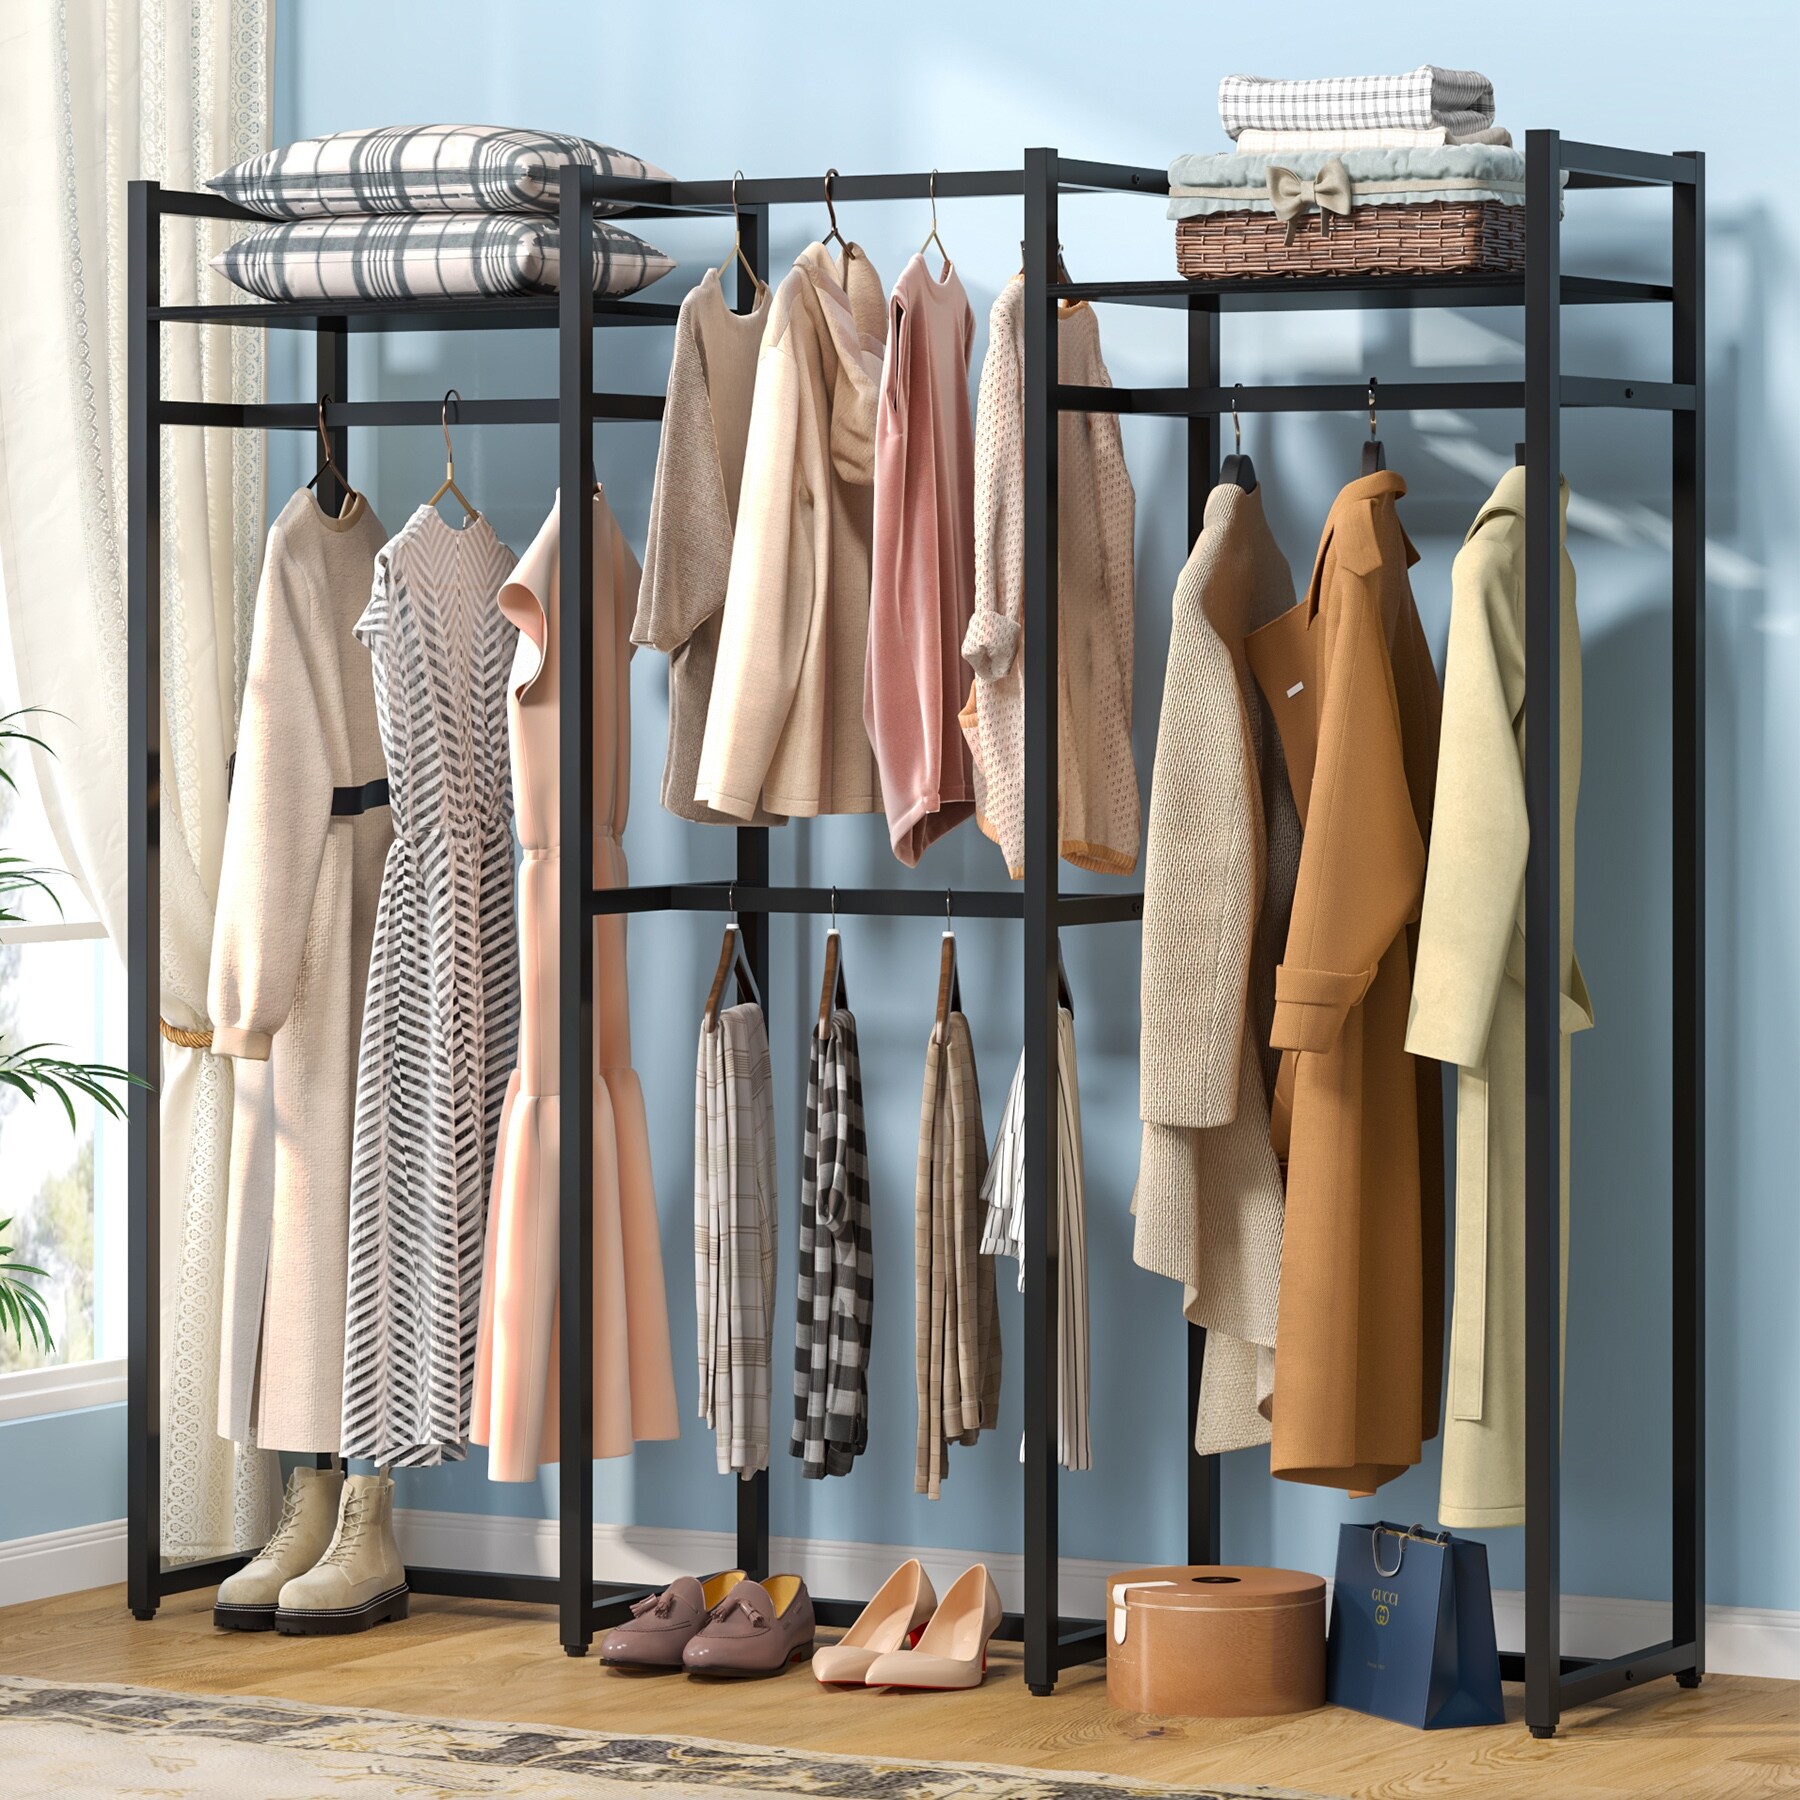 https://ak1.ostkcdn.com/images/products/is/images/direct/dbde206503abfd1be49ed3ccdfa952da674f6fdb/Garment-Rack-Heavy-Duty-Clothes-Rack-Free-Standing-Closet-Organizer-with-Shelves%2C-Large-Size-Storage-Rack-with-4-hanging-Rods.jpg